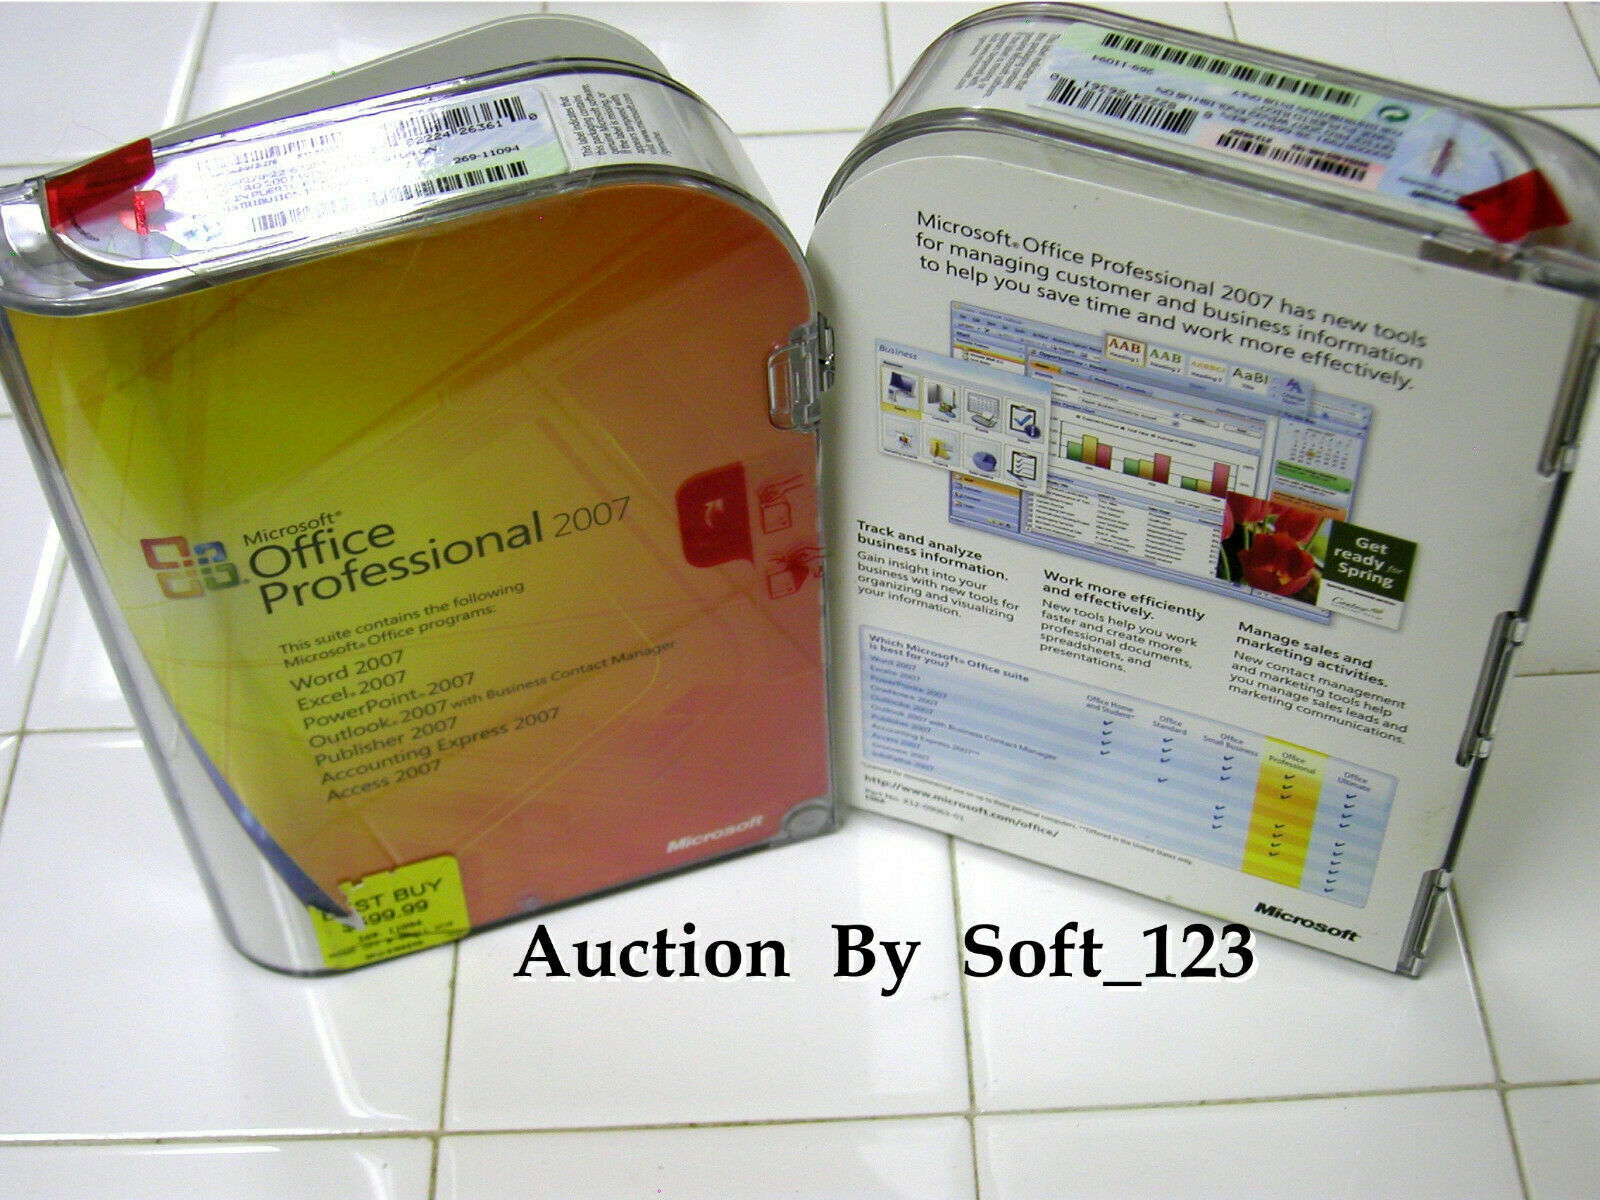 MS Microsoft Office 2007 Professional Full Vers. Licensed for 2 PCs=SEALED BOX=